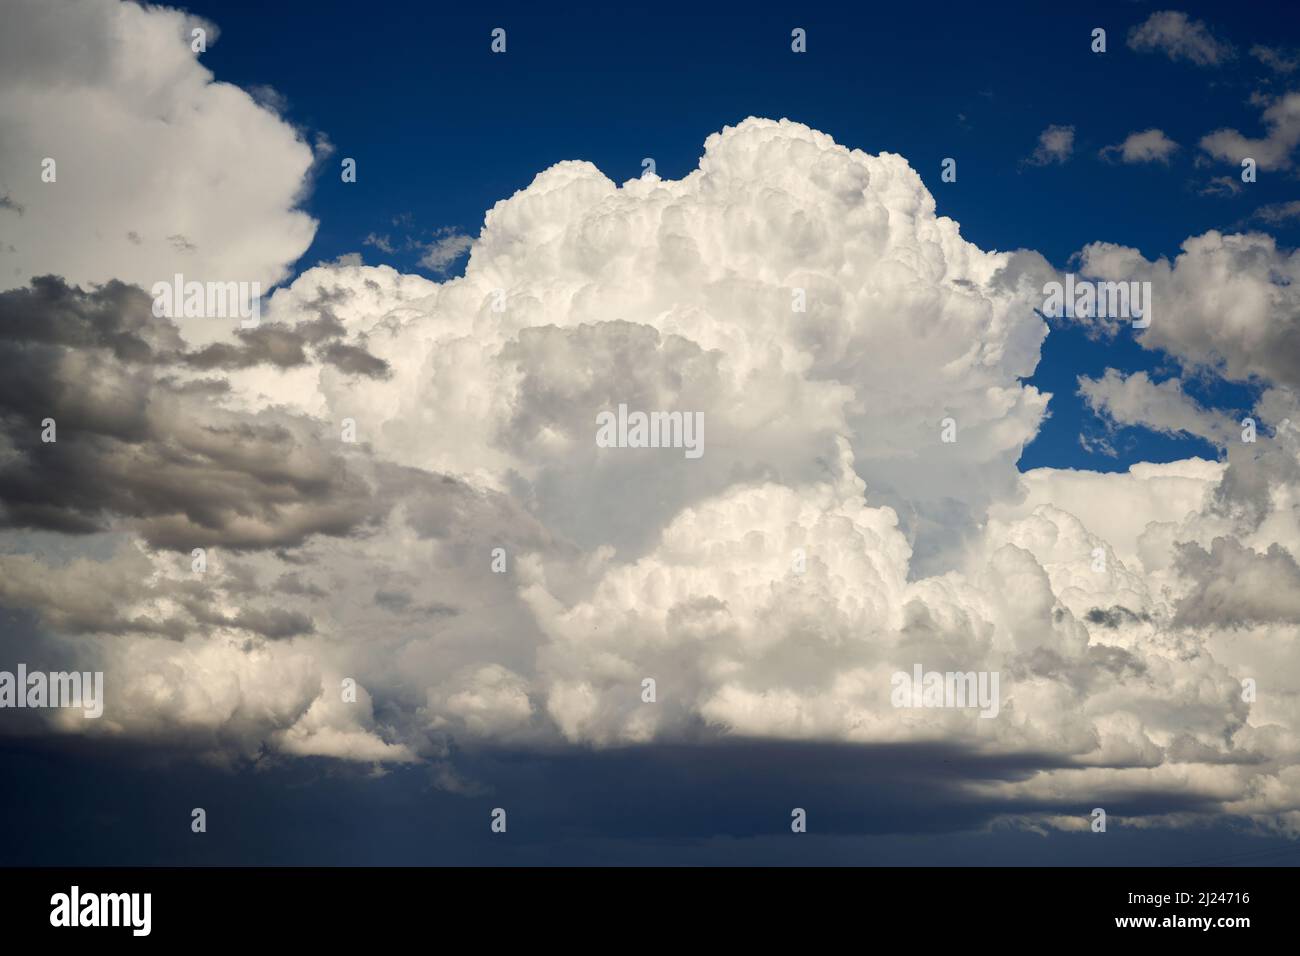 Cumulus clouds building at the edge of a storm front. Late afternonn light defiining their structual beauty. Stock Photo